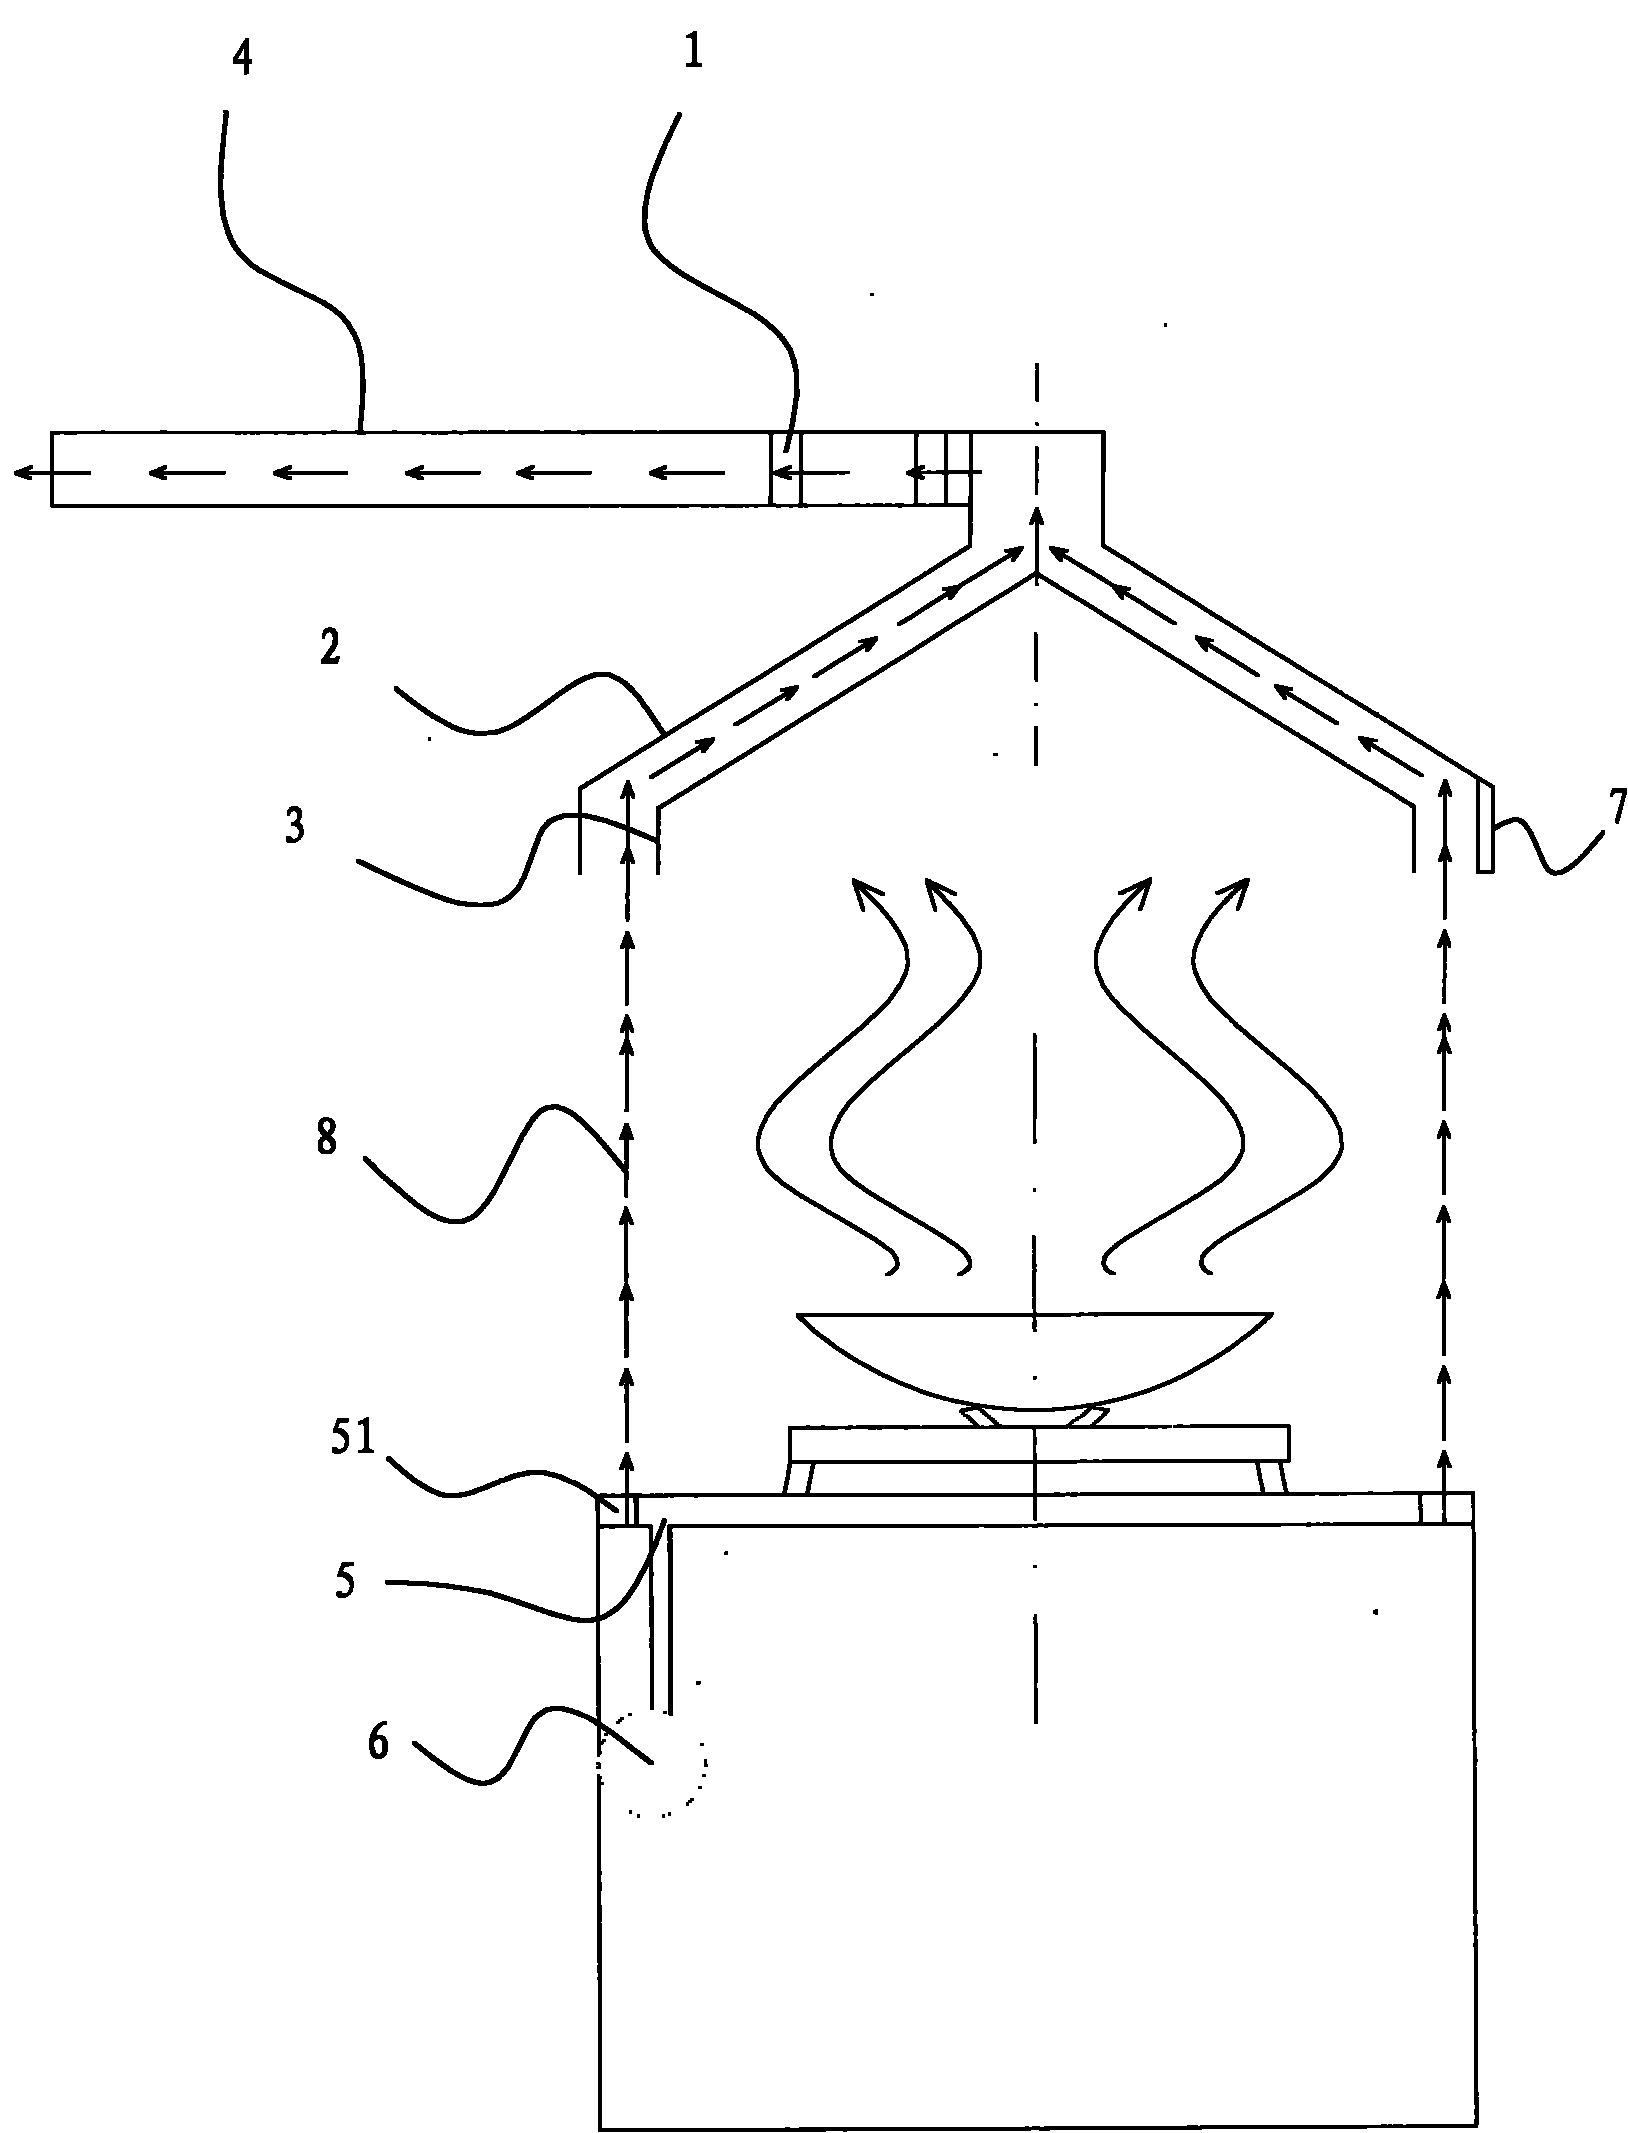 Smoke exhaust ventilator and air curtain device